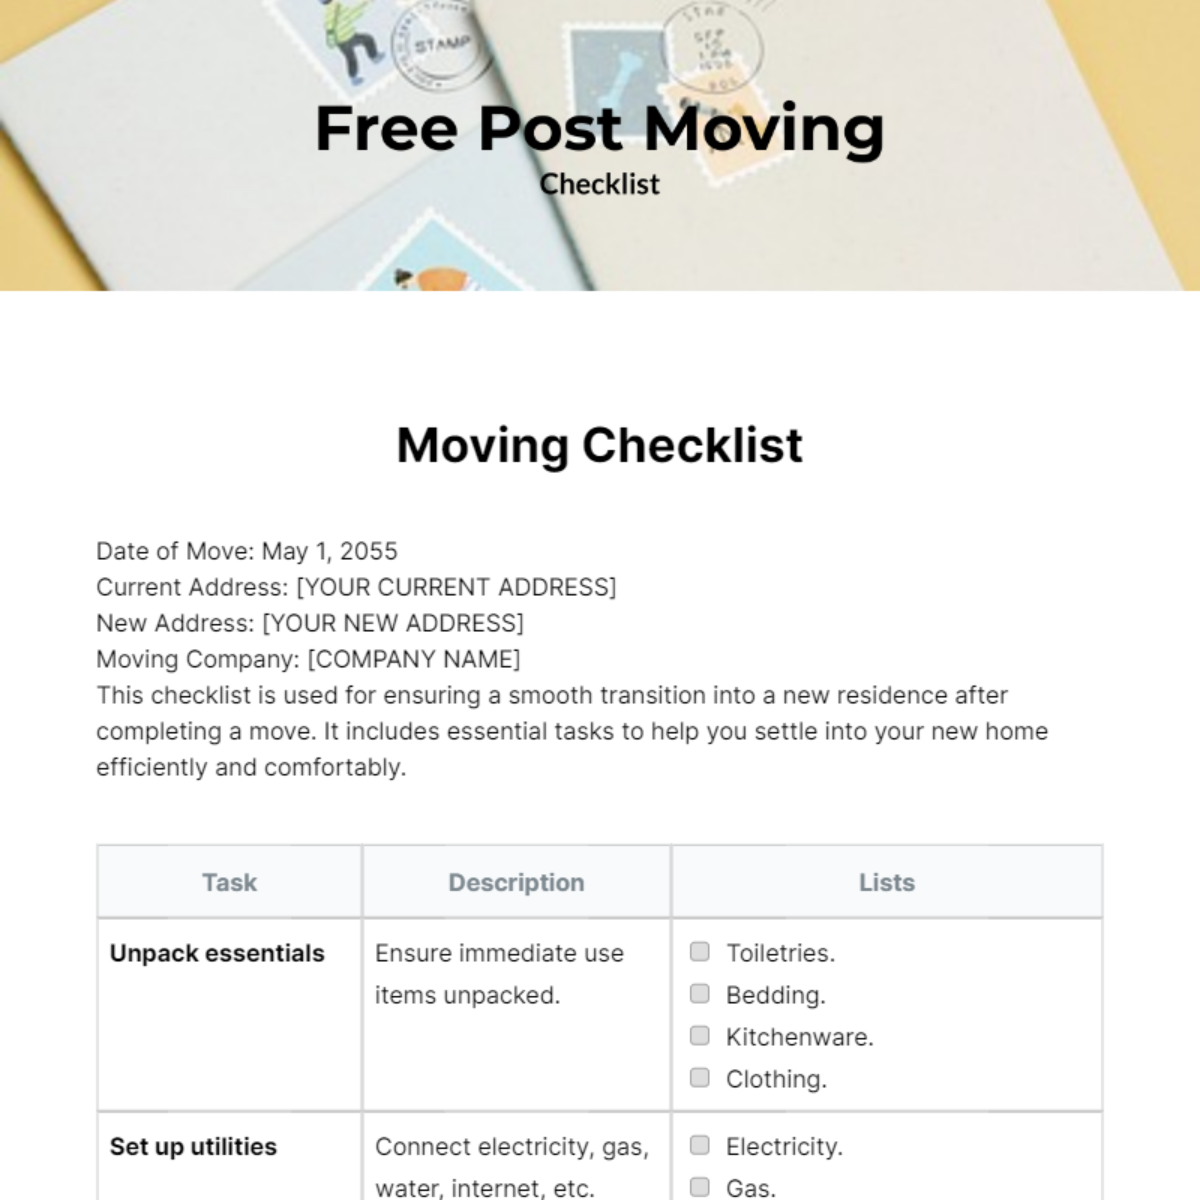 Free Post Moving Checklist Template